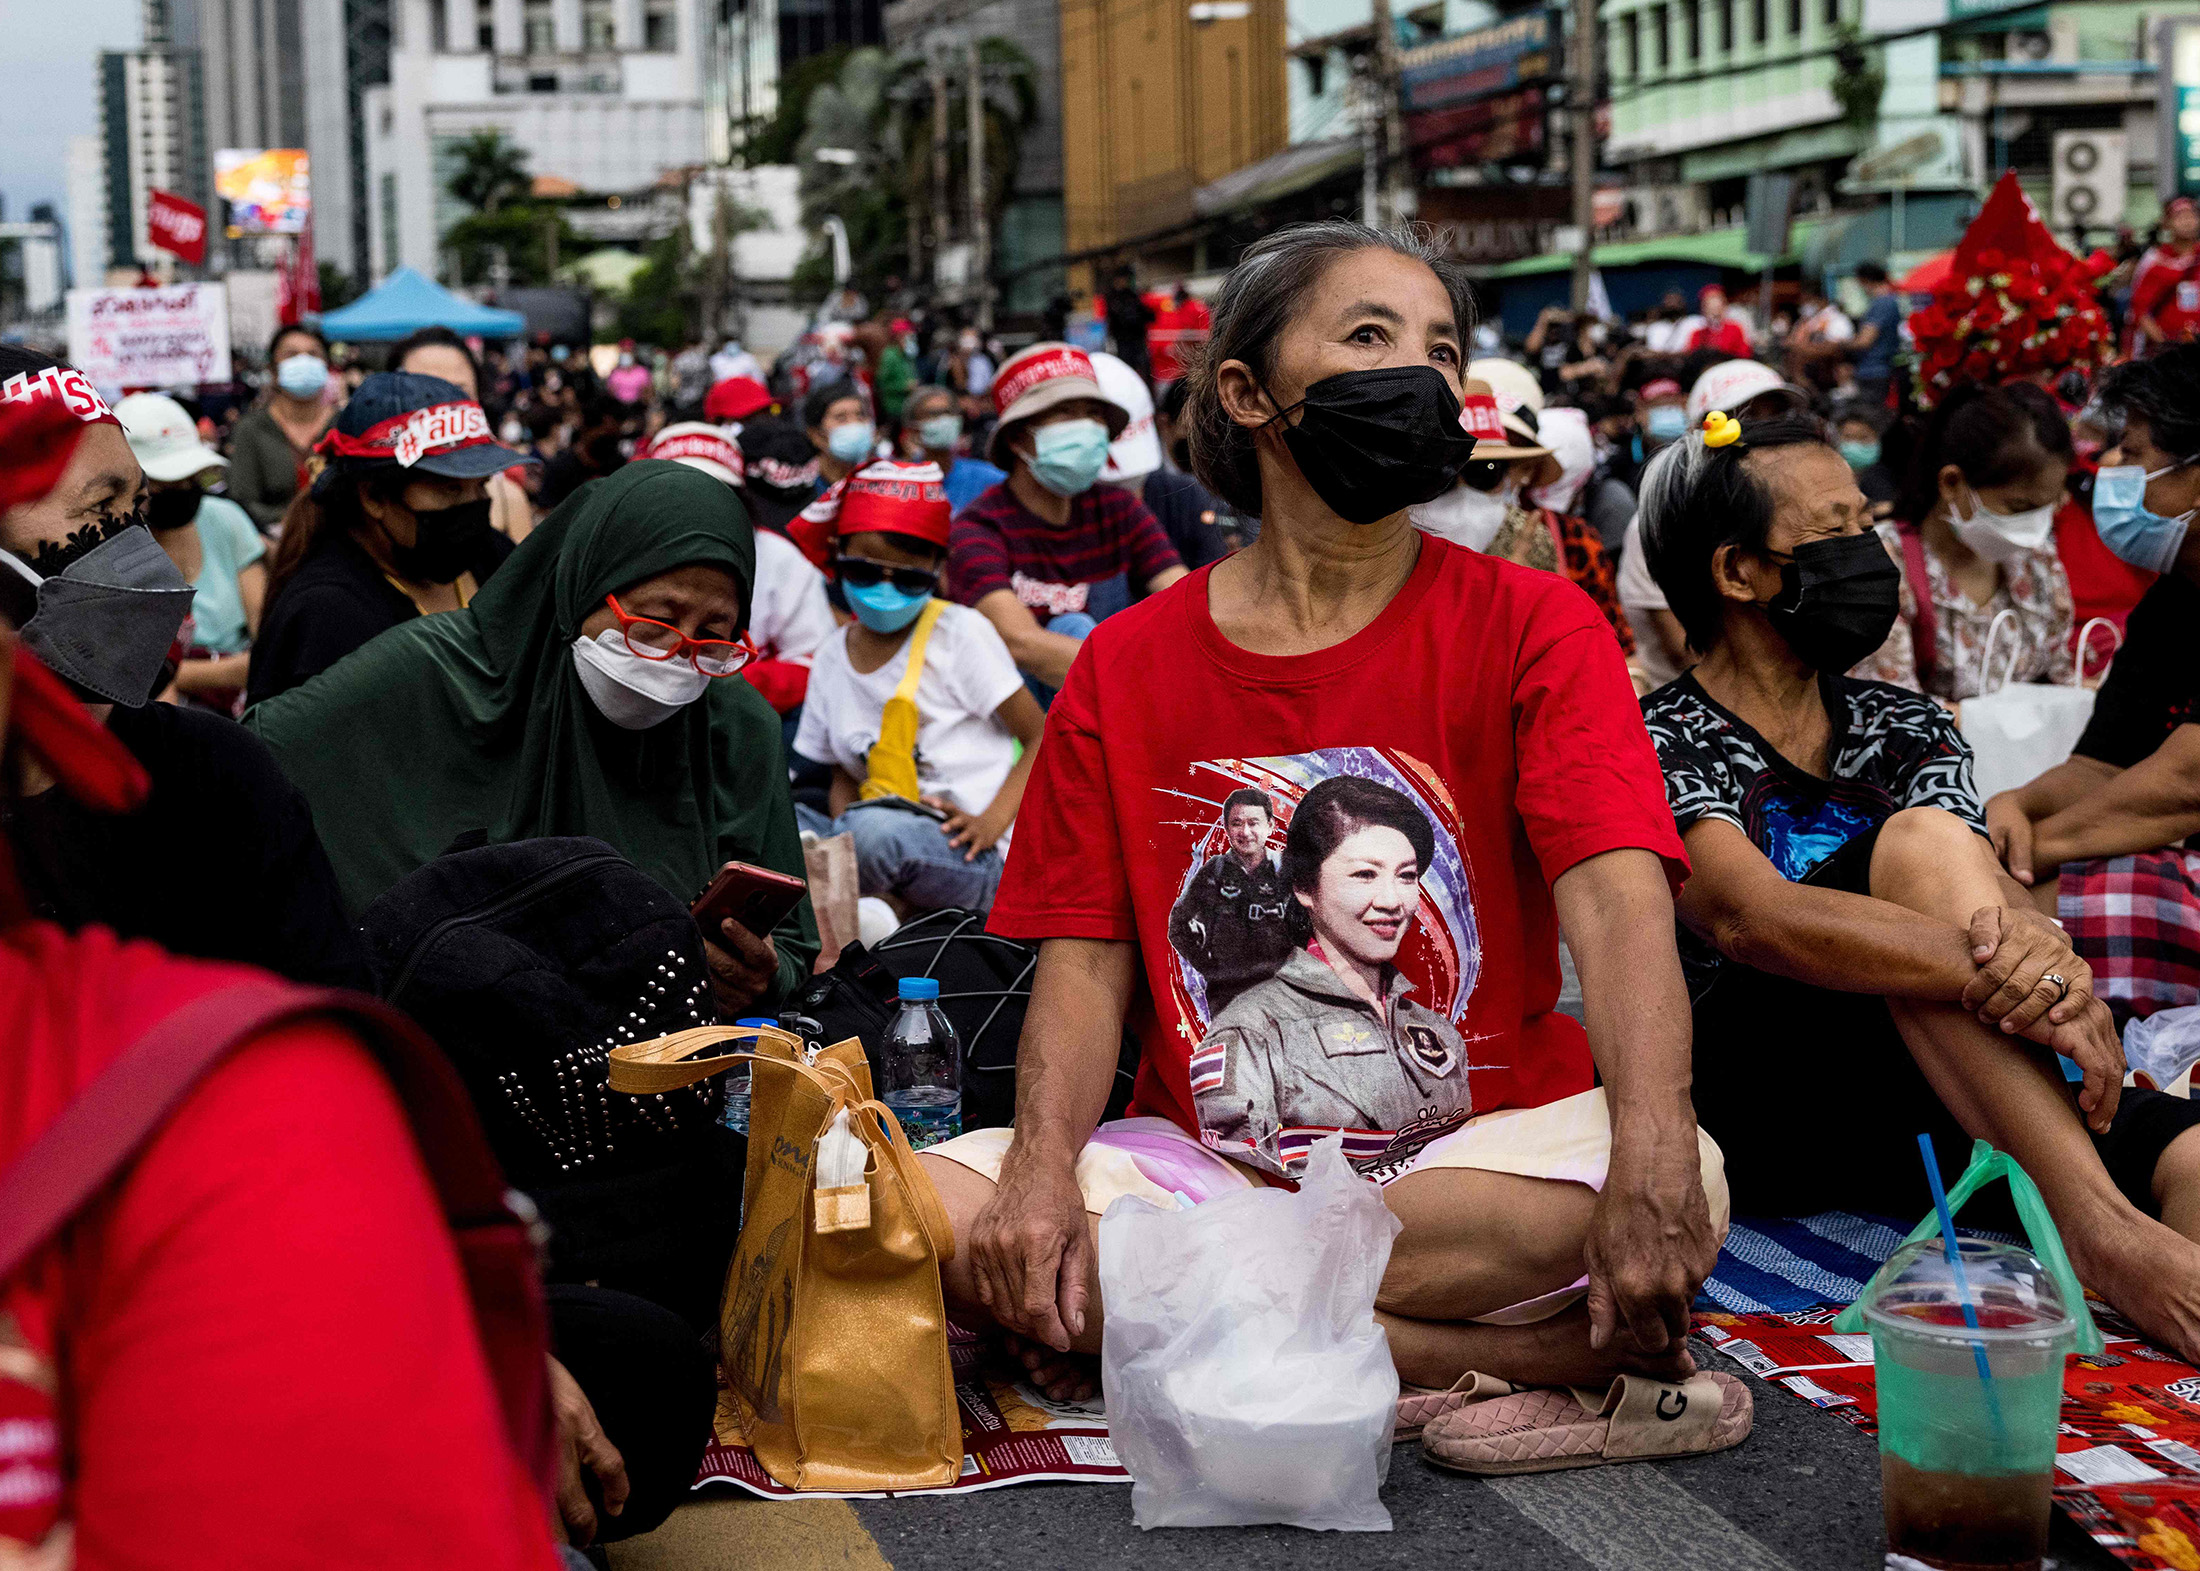 A protester wears a t-shirt featuring Thaksin and Yingluck Shinawatra during a demonstration in Bangkok on Sept. 2.